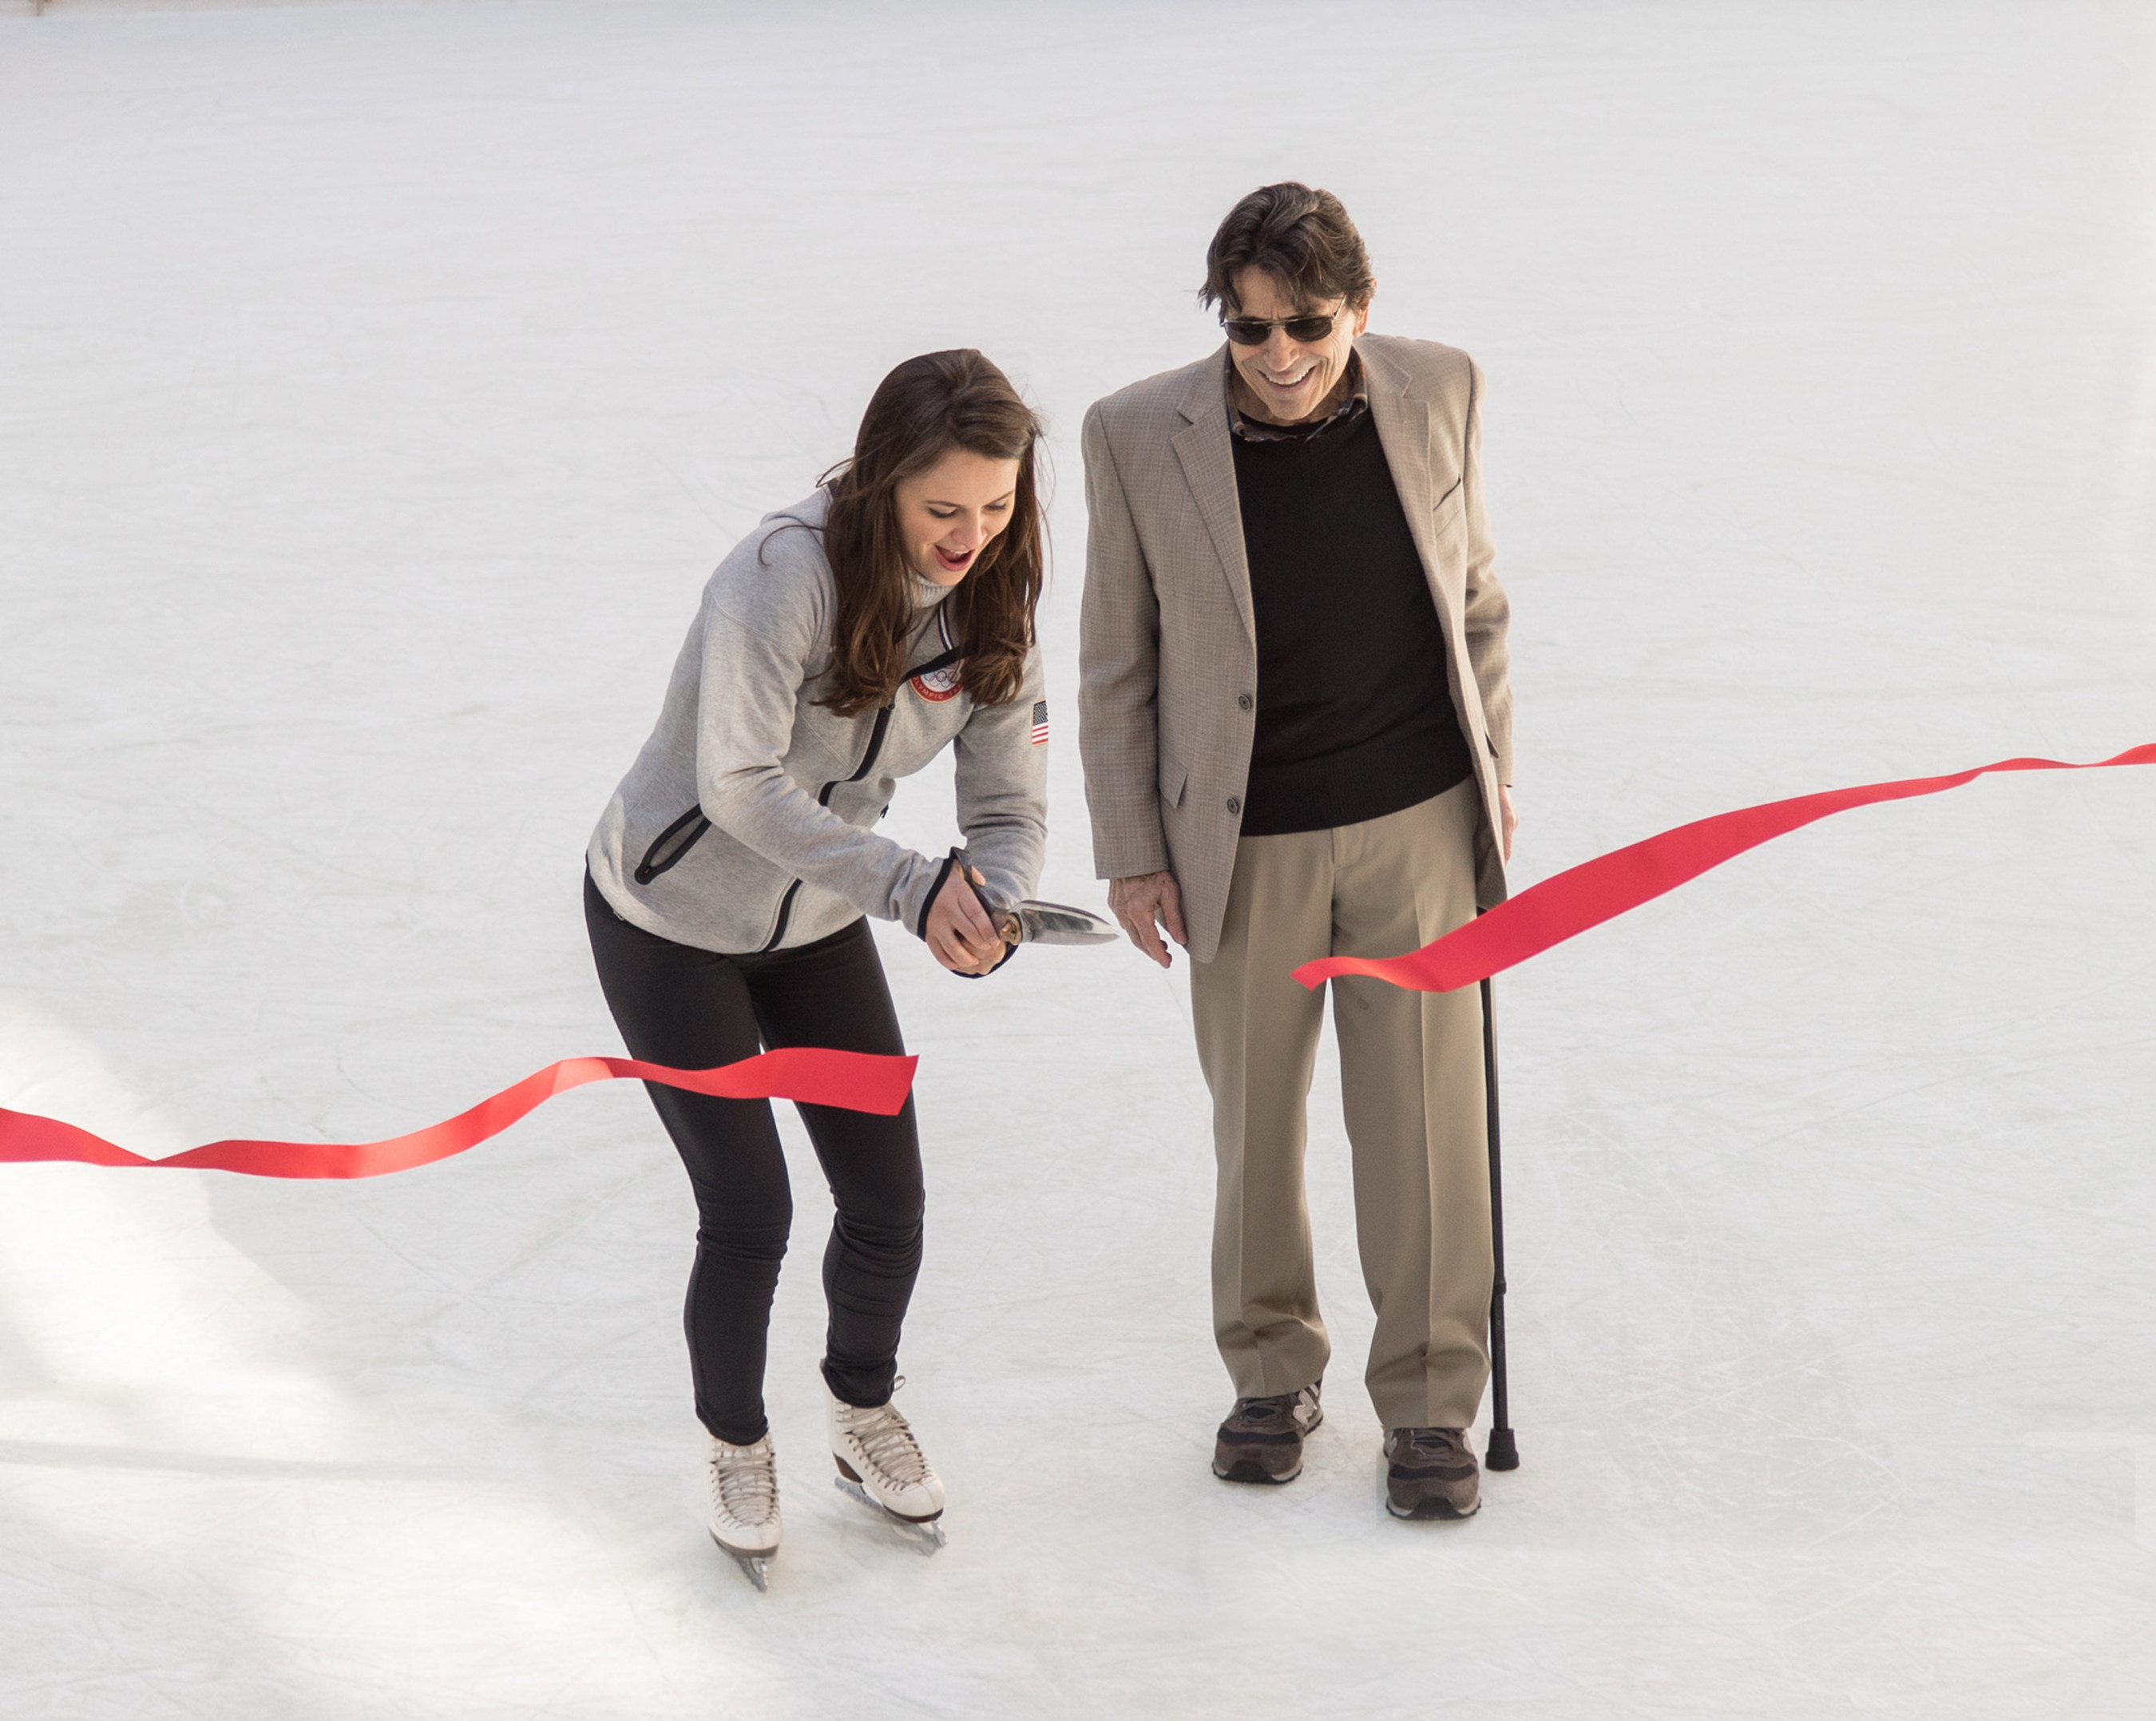 Olympic Figure Skater Sasha Cohen cuts the ribbon to open The Rink at Rockefeller Center with famed ballet choreographer Edward Villella, October 11, 2016. Both participated in the  opening ceremony of The Rink, a world famous attraction that is celebrating its 80th anniversary season.